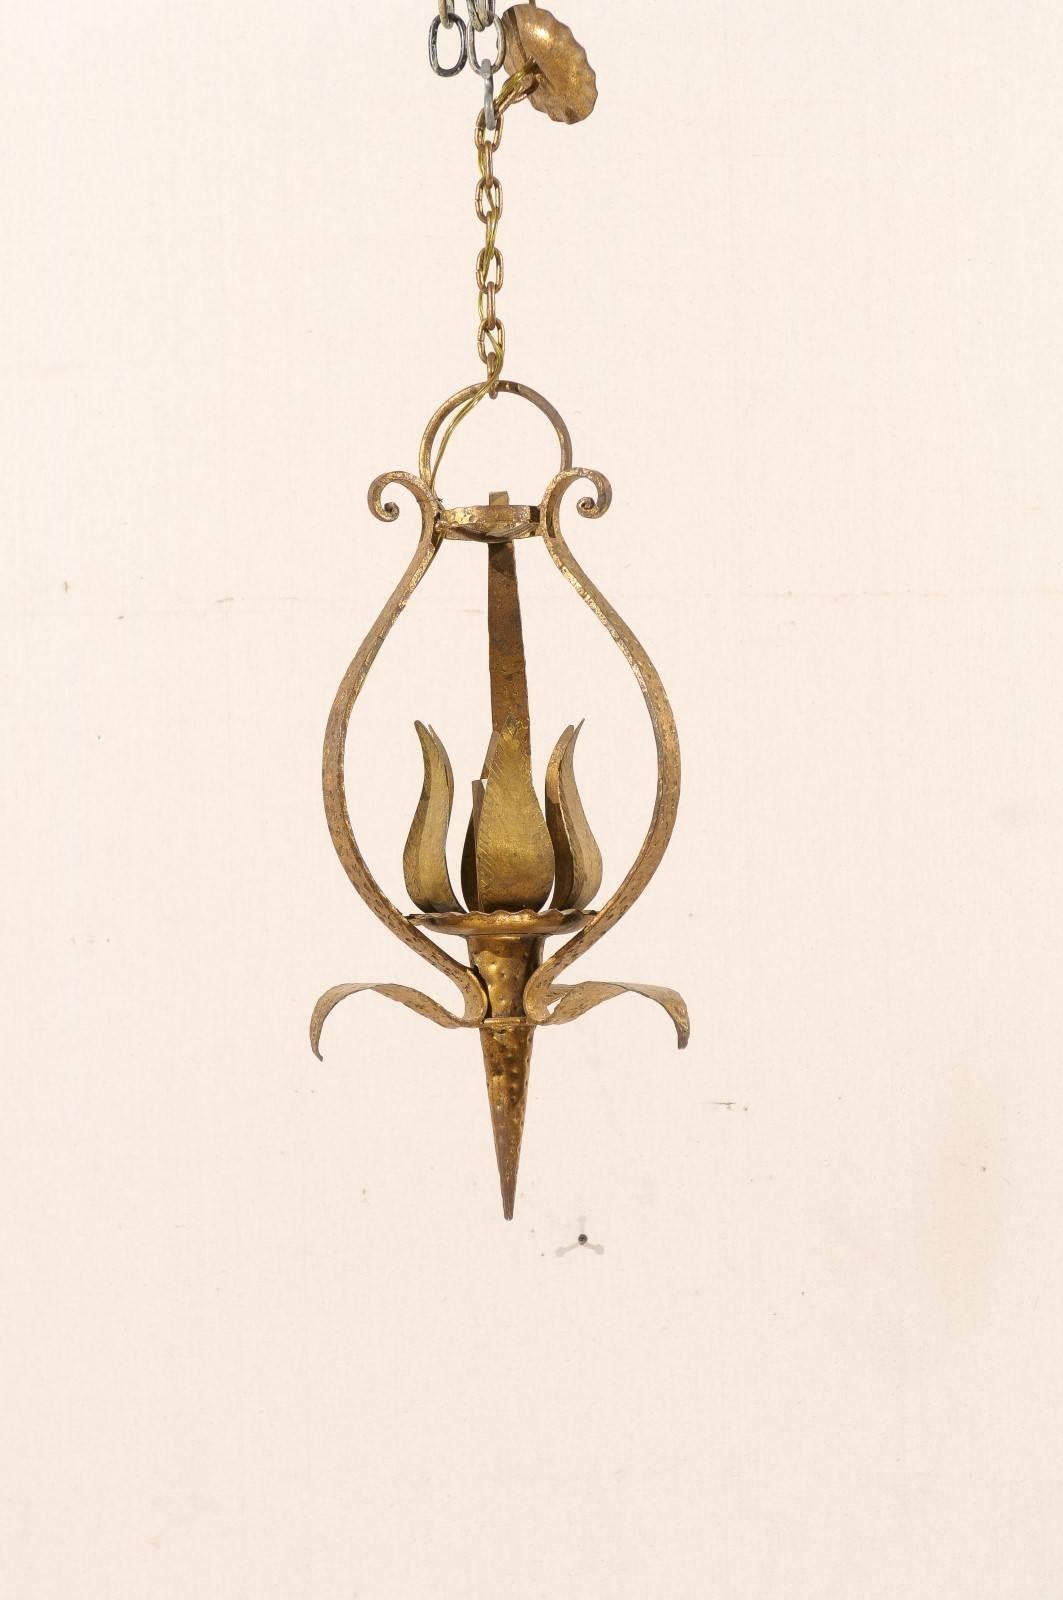 A French tulip shaped single-light gilded and hammered metal chandelier. This French mid-20th century chandelier features a modern designed central tulip ornament on cone base, surrounded with a scrolled armature. This chandelier has been rewired